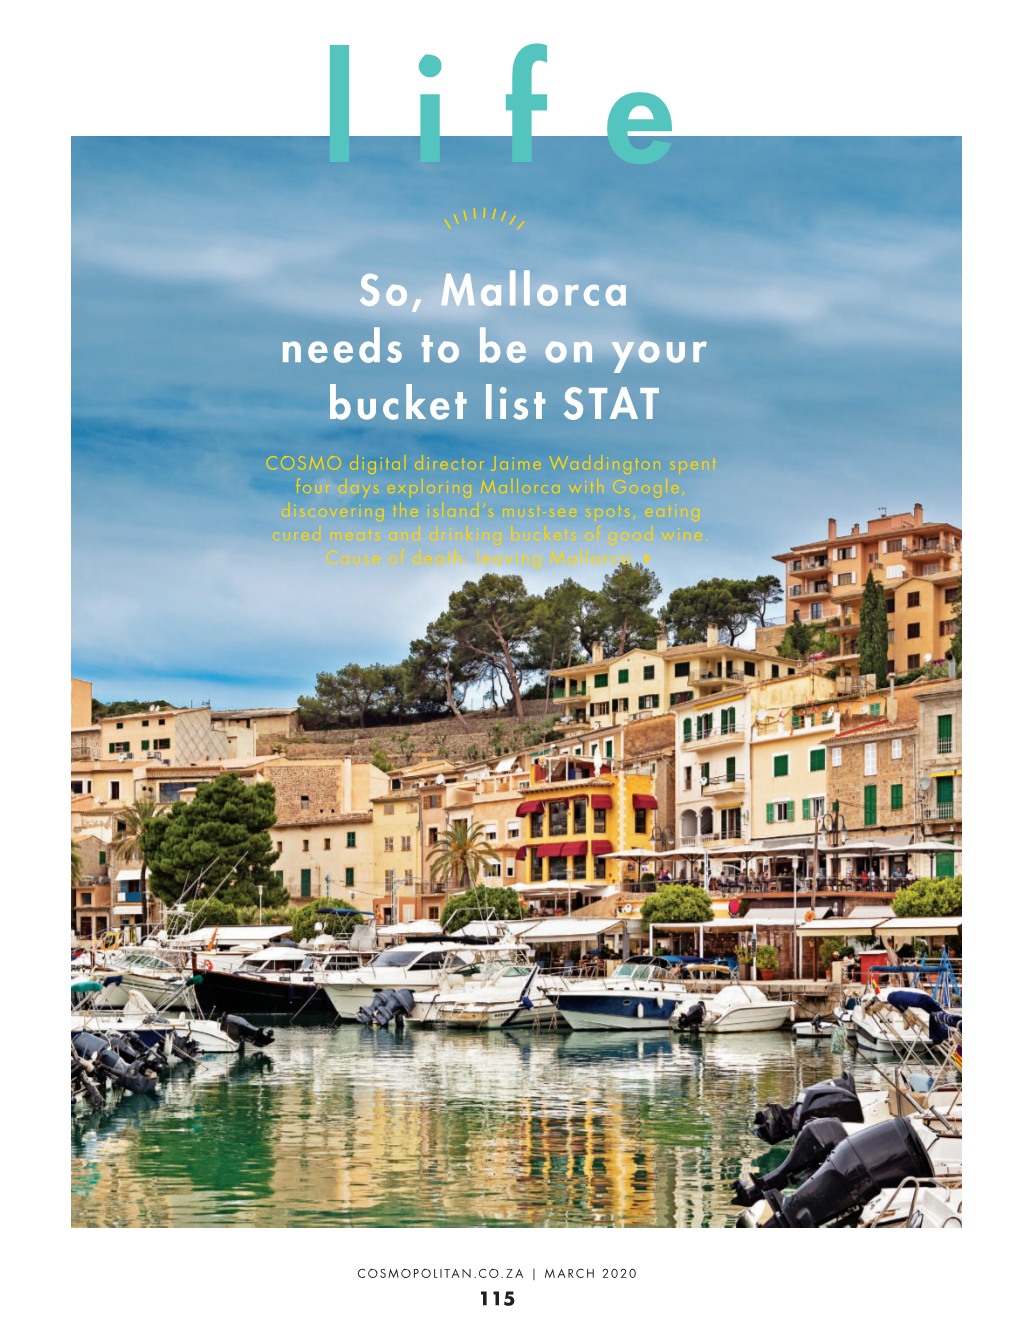 So, Mallorca Needs to Be on Your Bucket List STAT